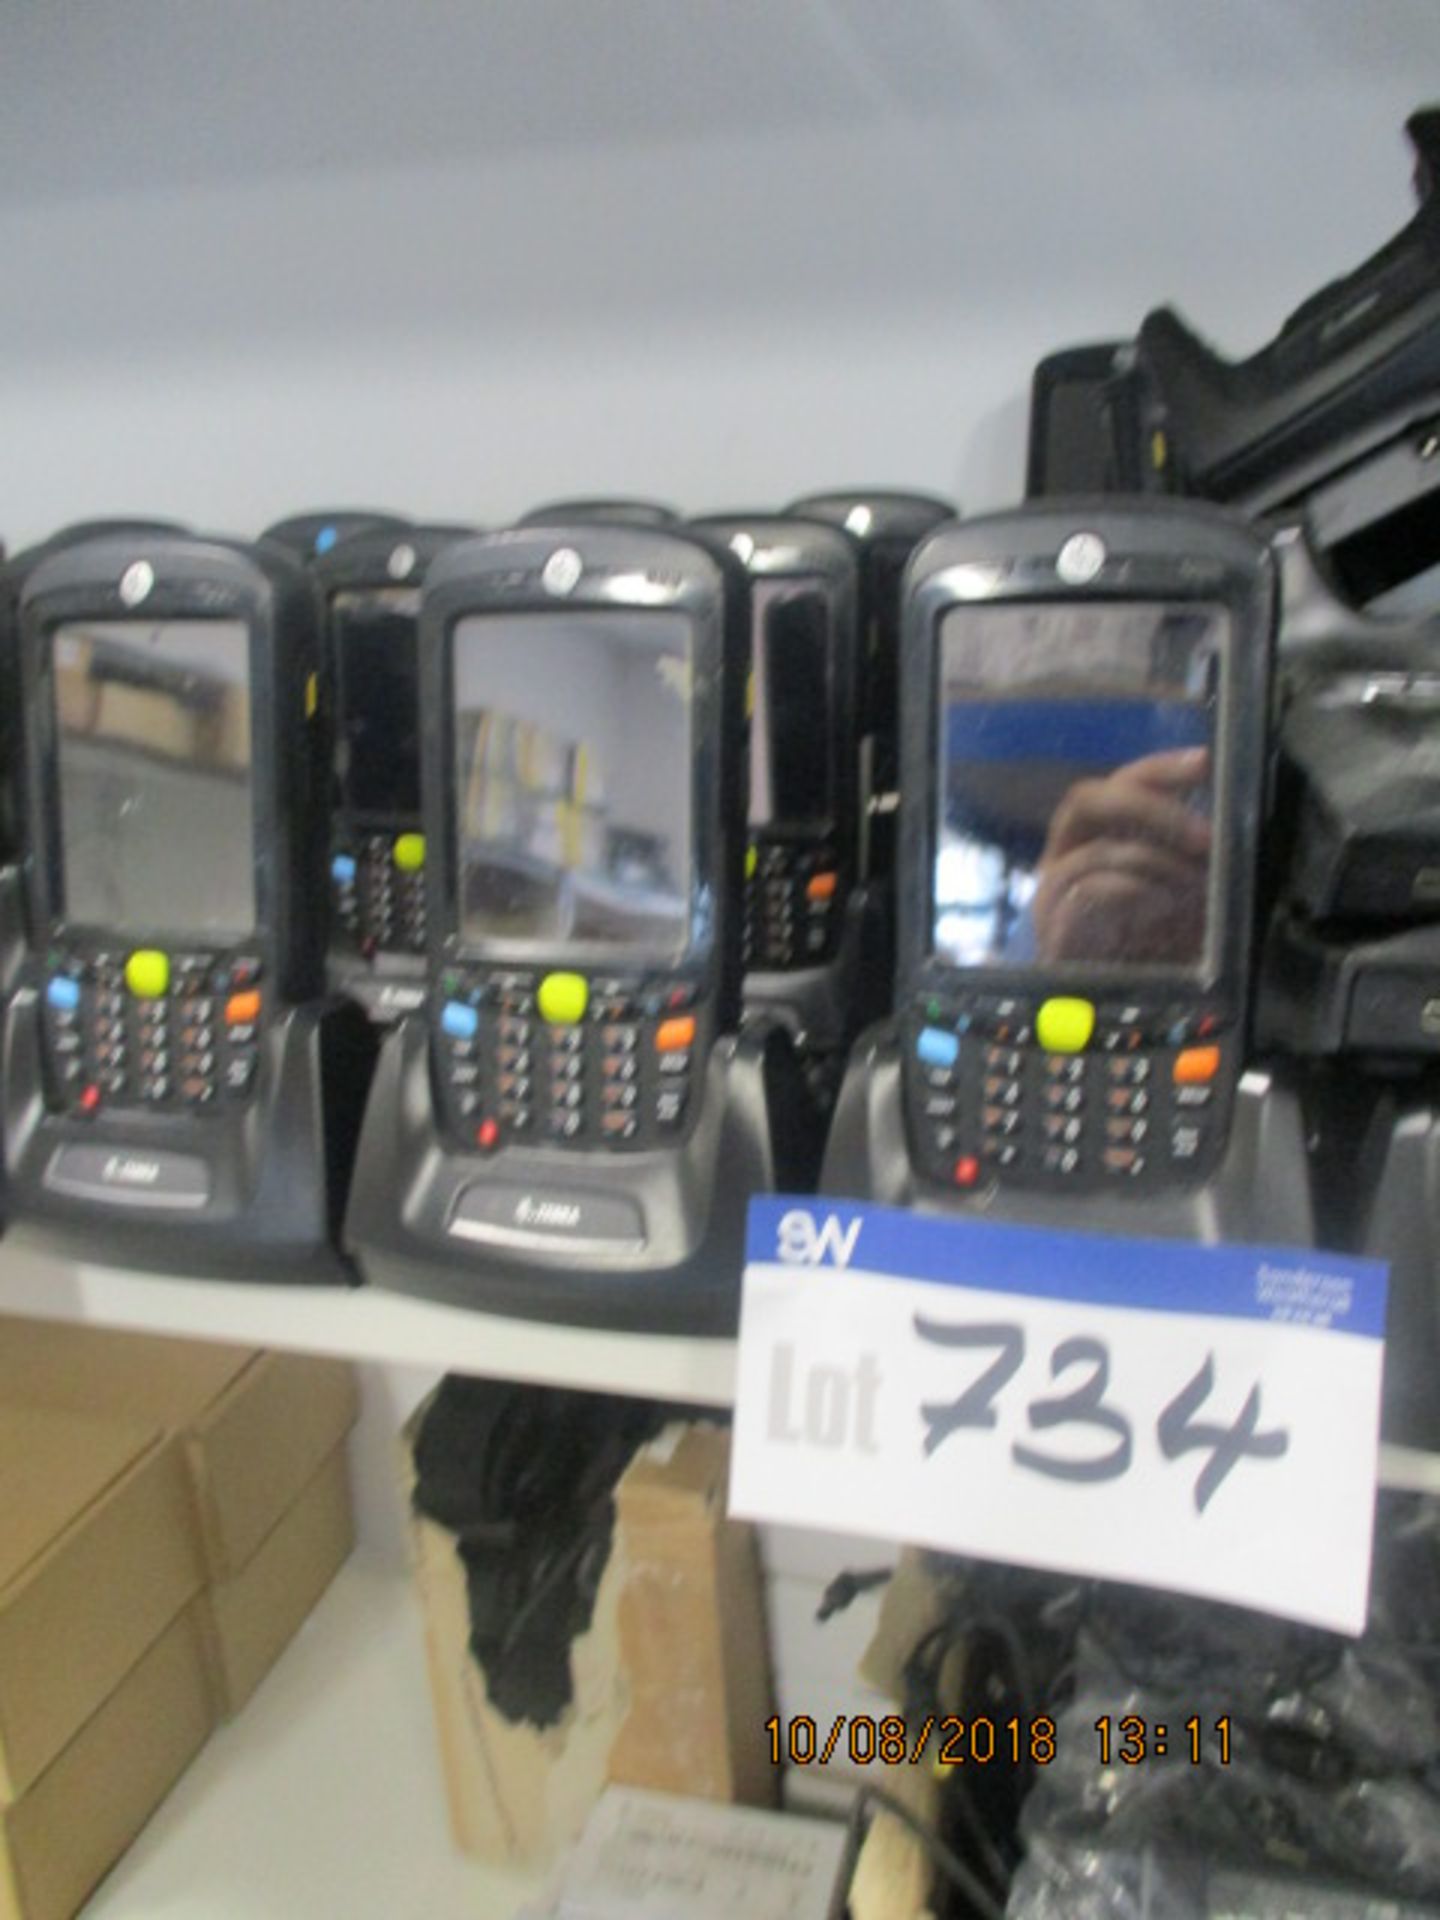 9 x Zebra Scanners, with Quantity of Tower Charger